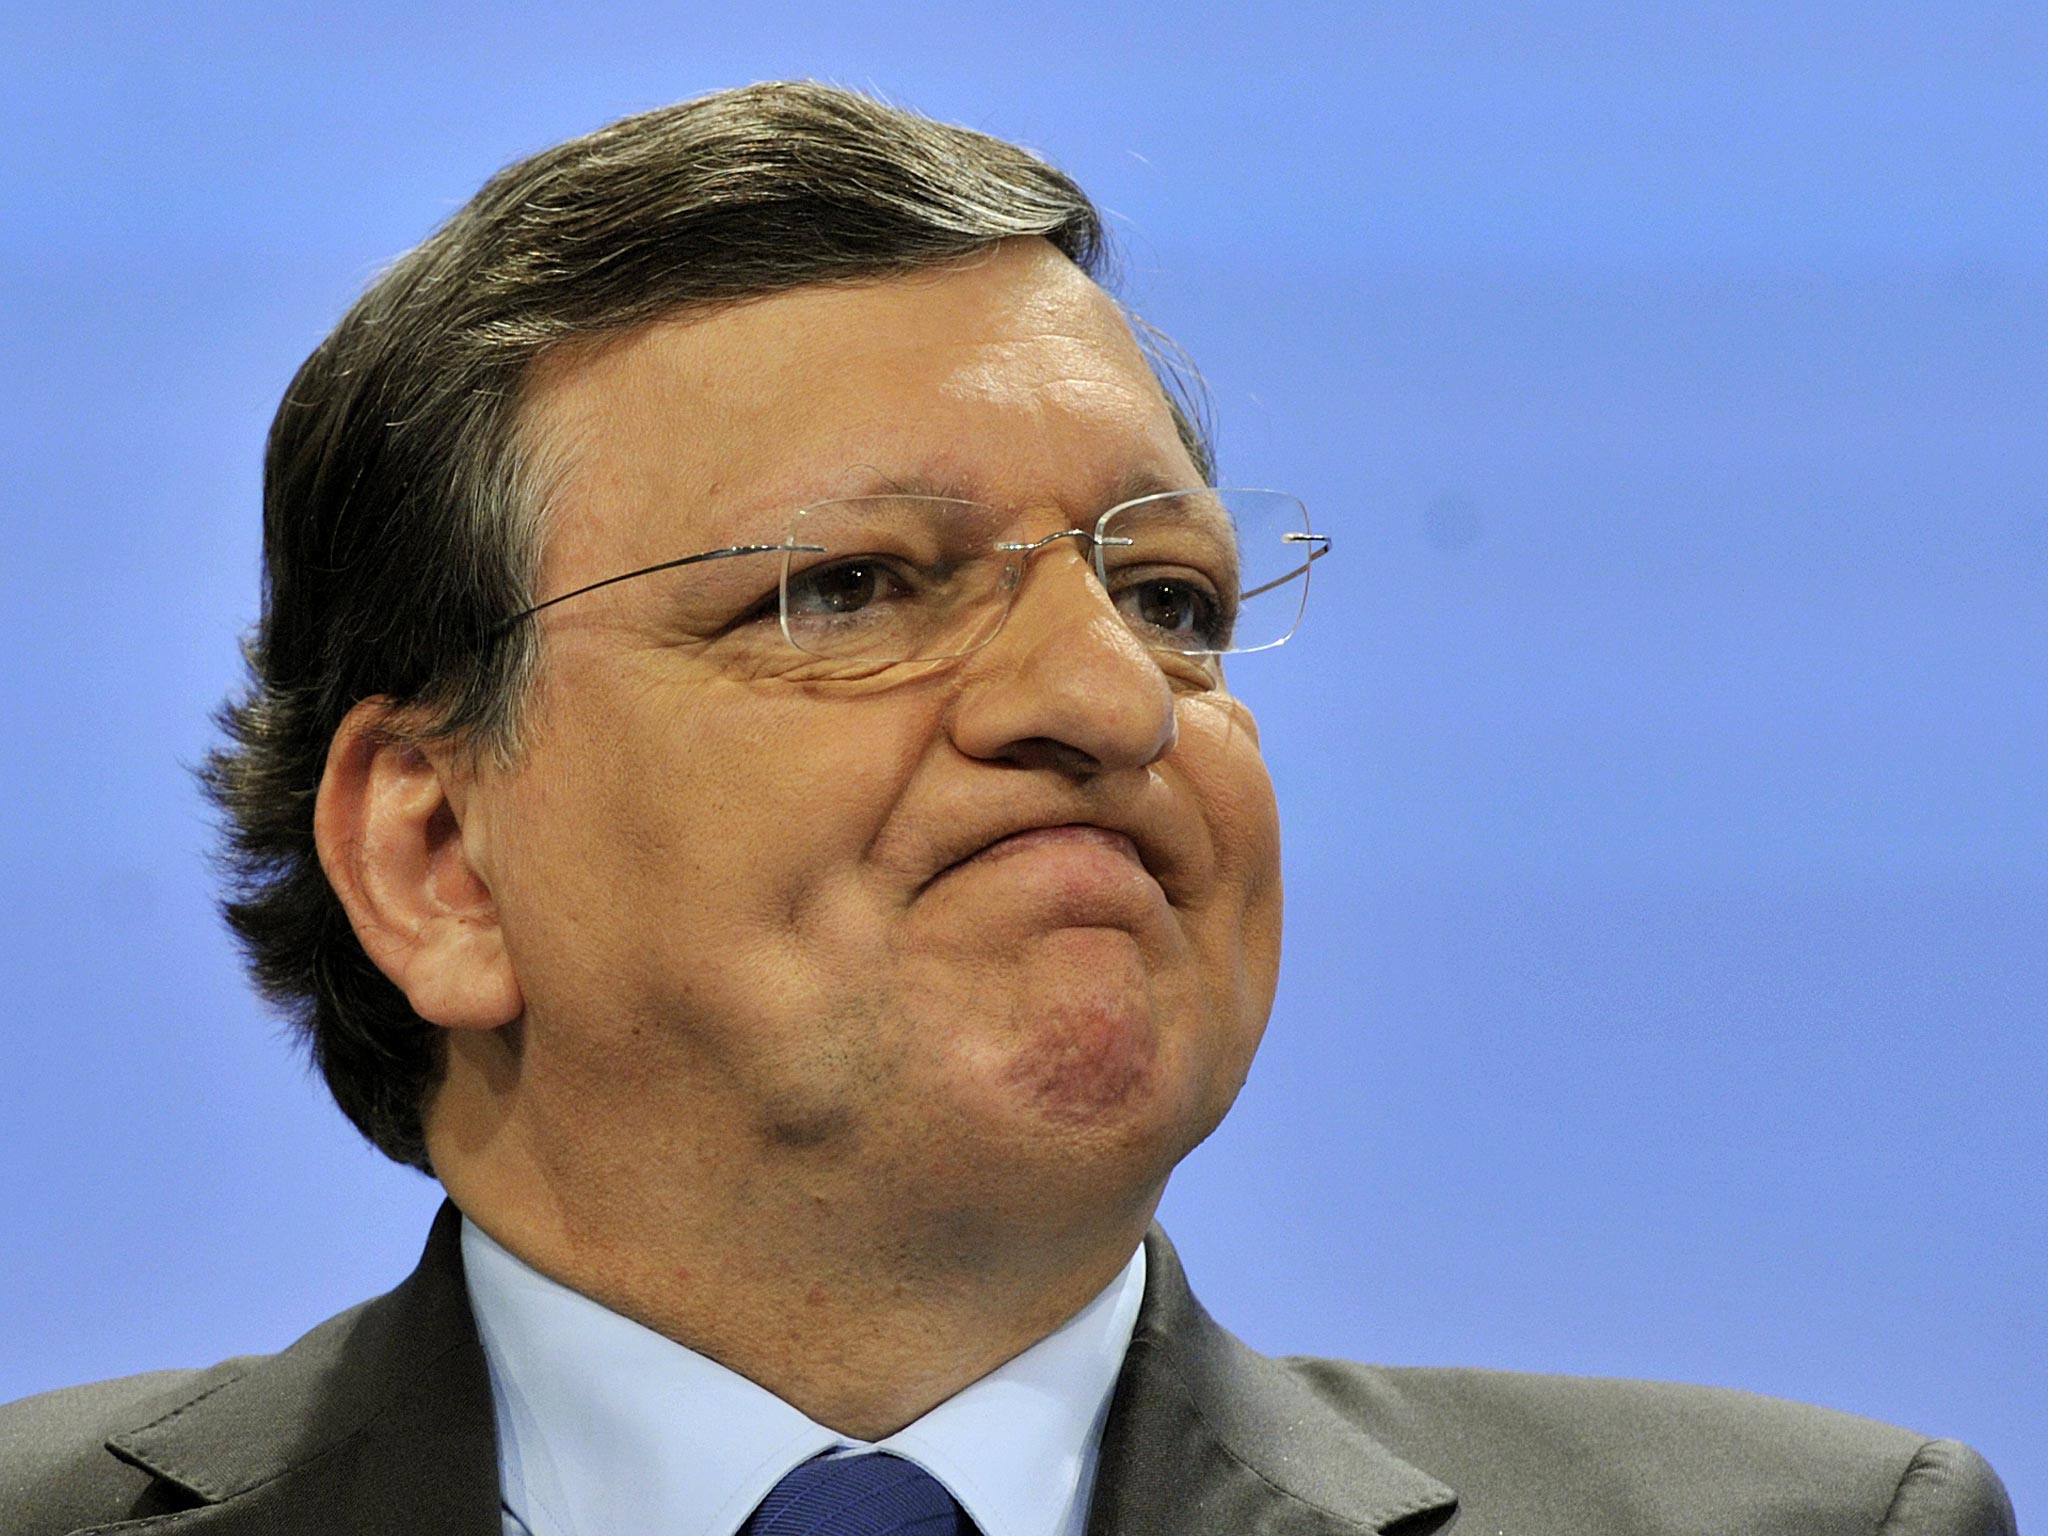 President of the European Commission Jose Manuel Barroso has said that it will be difficult for Scotland achieve EU membership